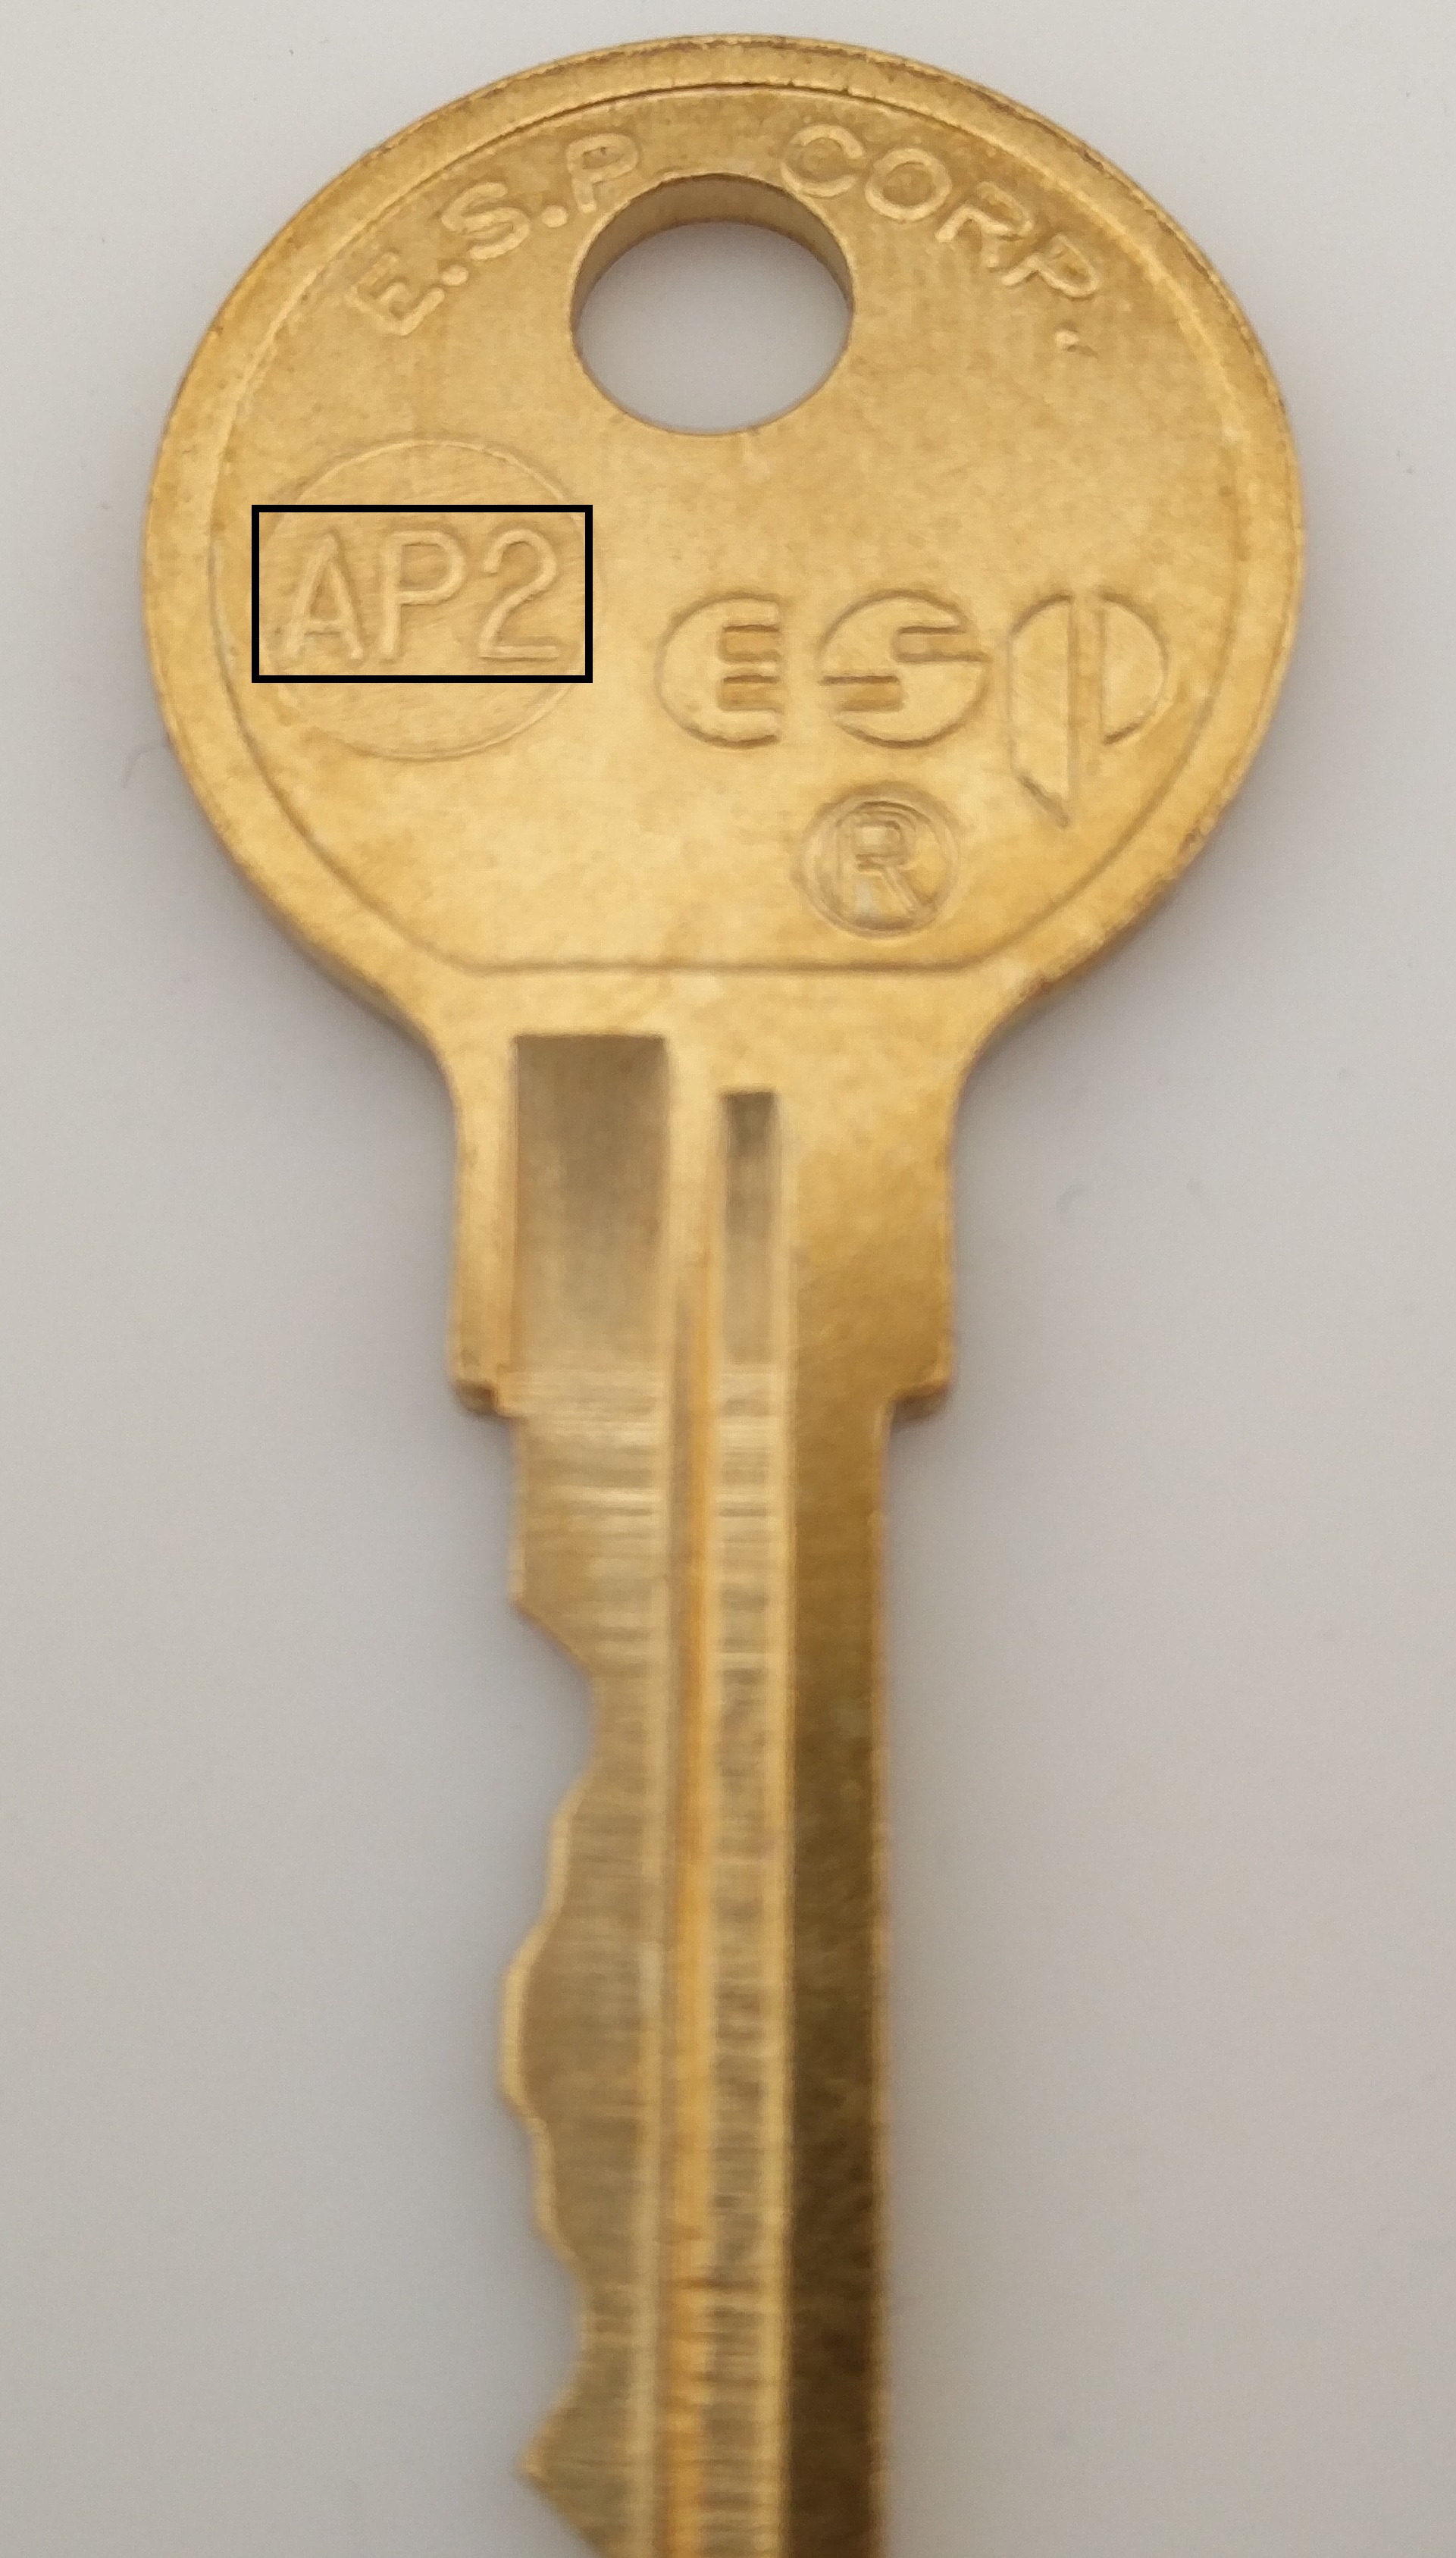 padlock with key and code